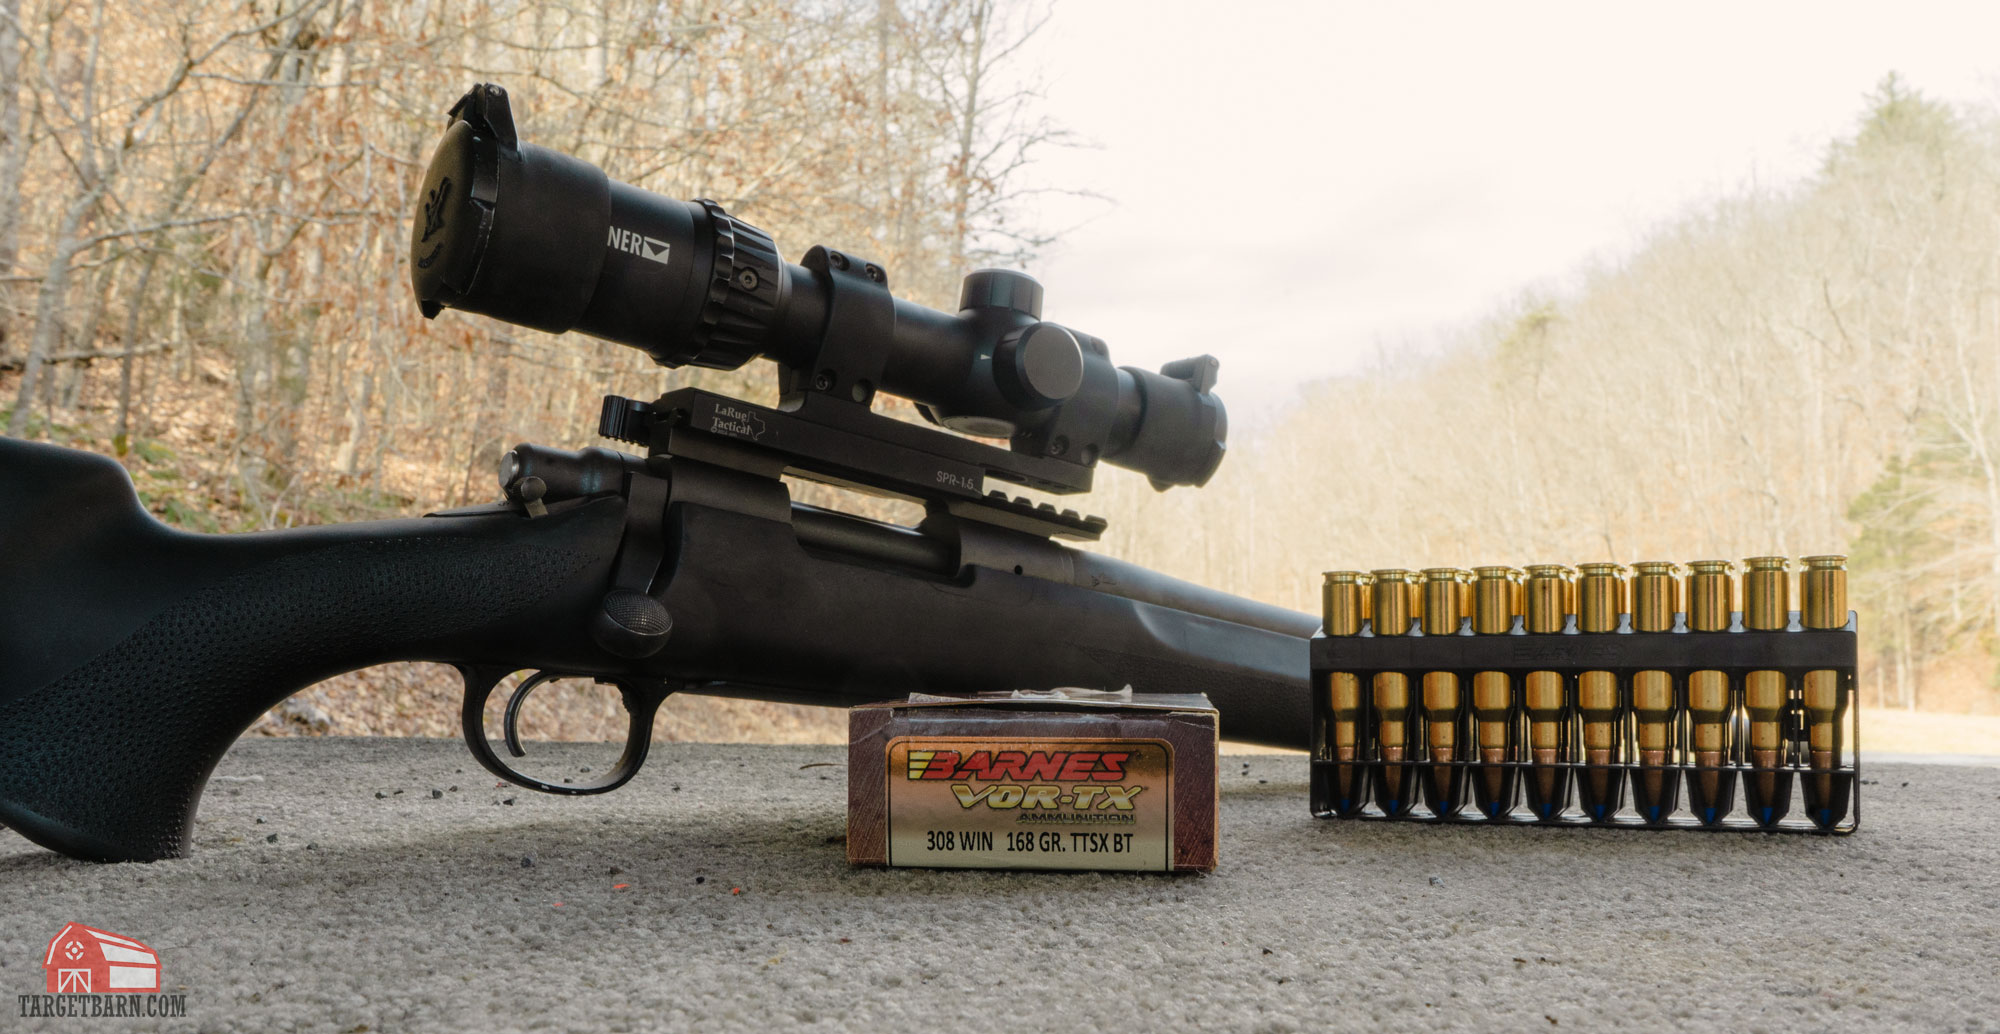 a scoped rifle and barnes vortex 308 boat tail bullets box and ammo on the shooting bench at the range